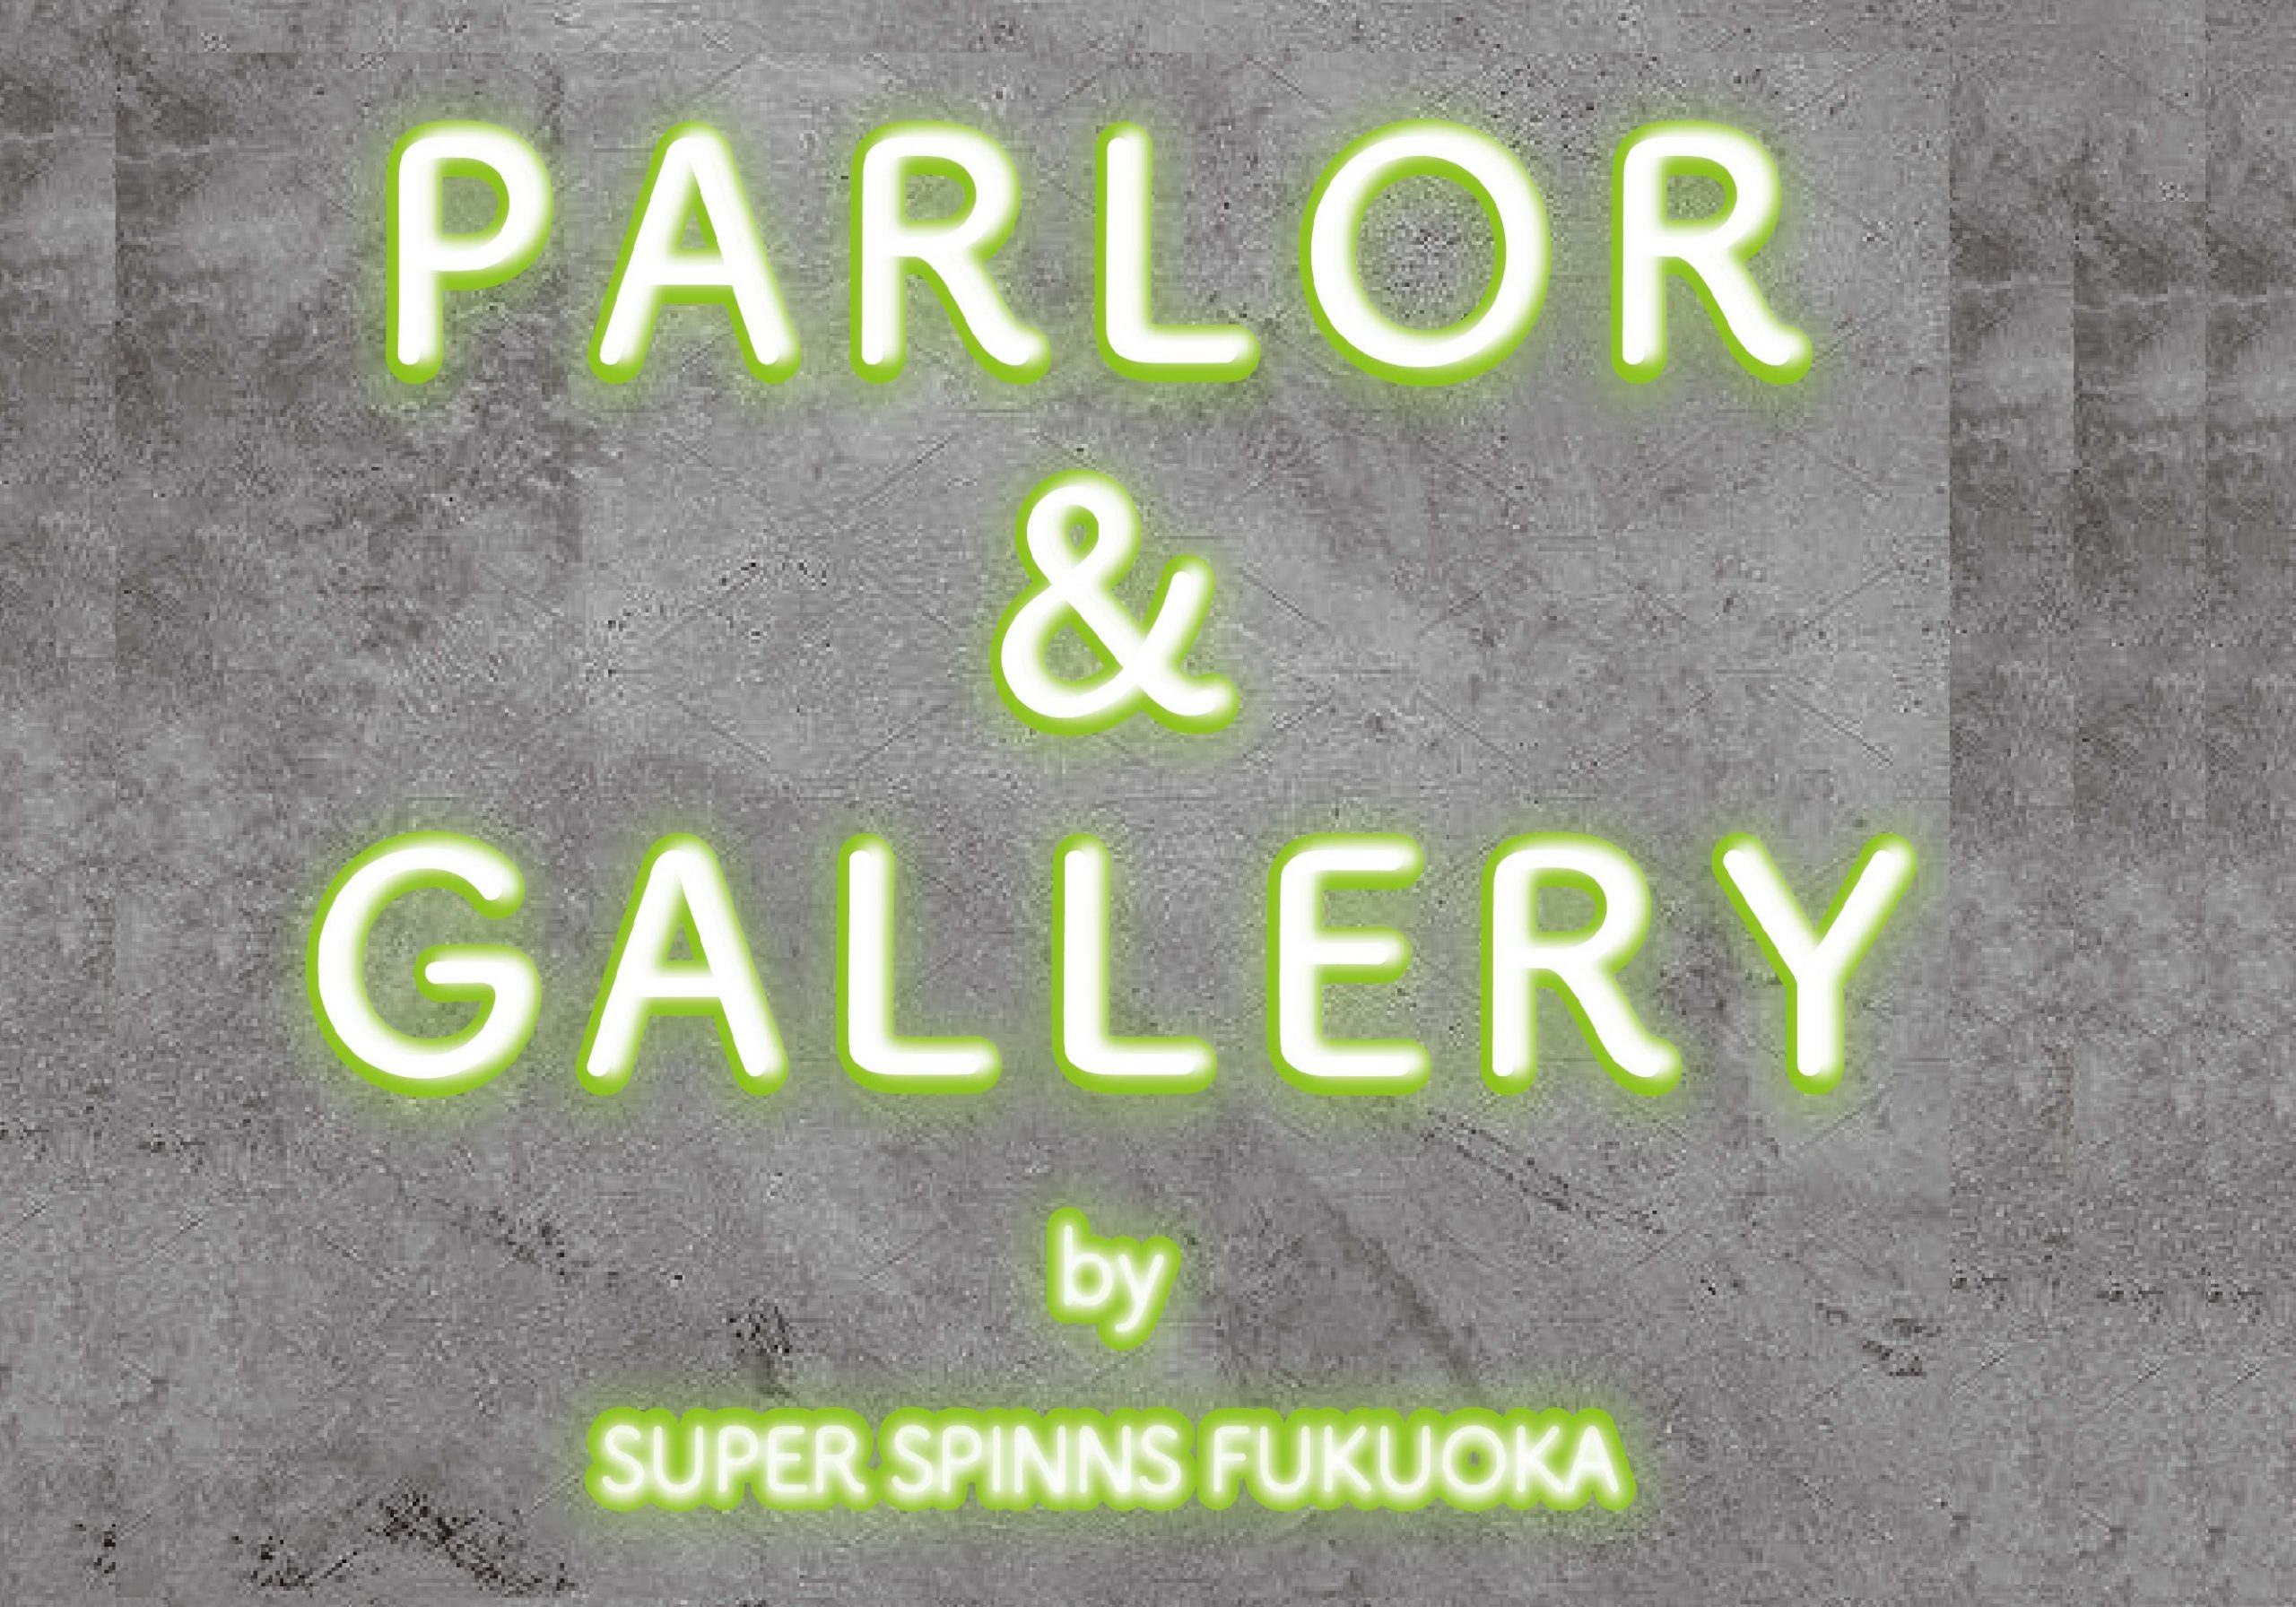 【NEW】PARLOR&GALLERY＠SUPERSPINNS福岡店